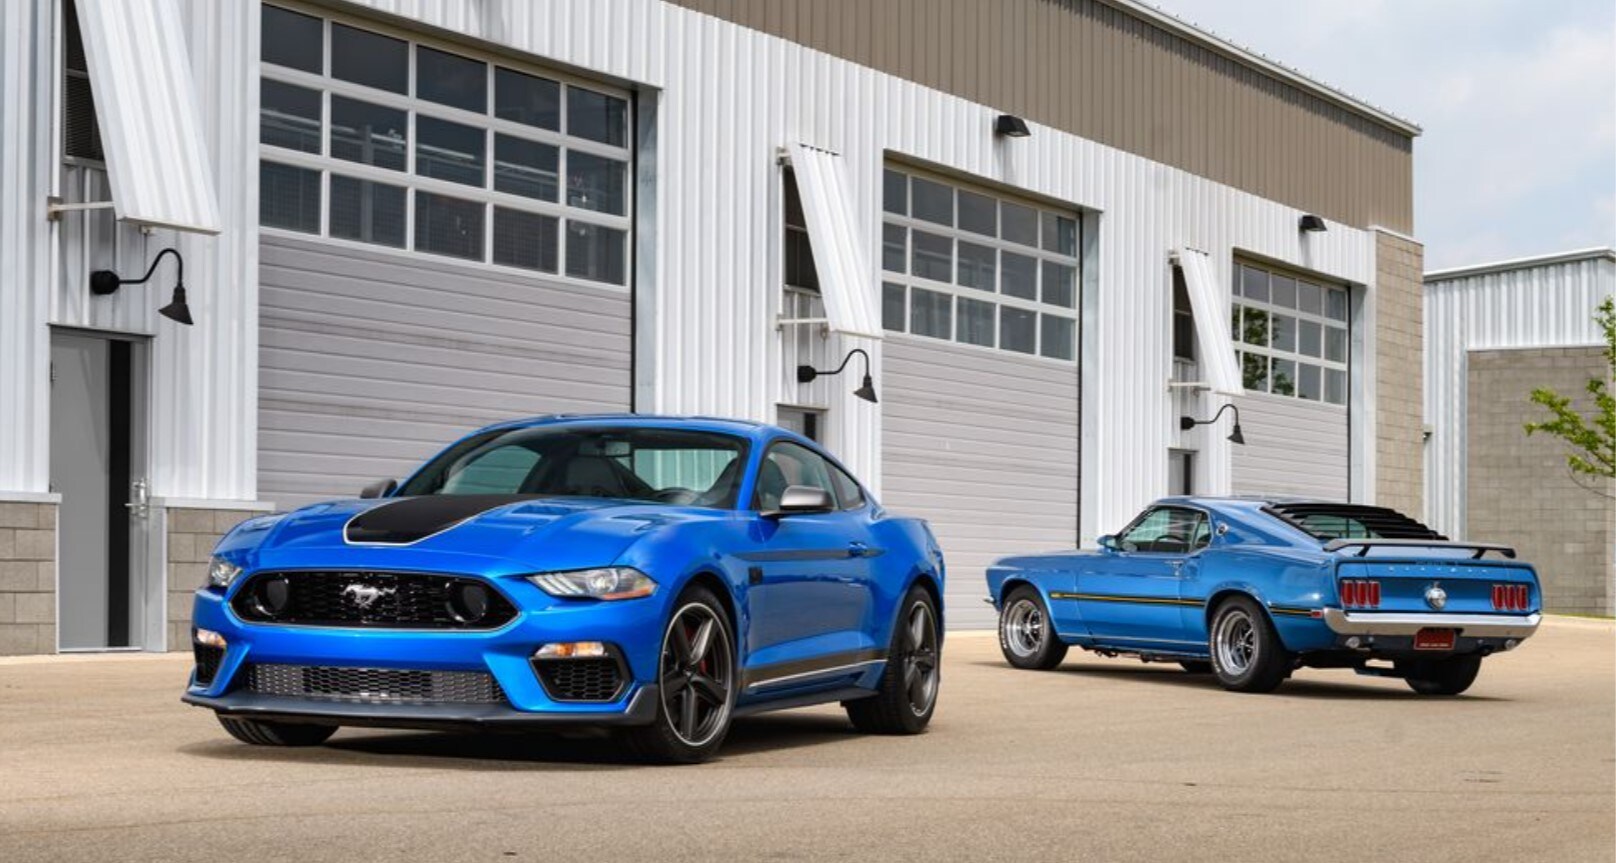 two blue Ford Mustang Mach-1s side by side, one old and one 2021 model